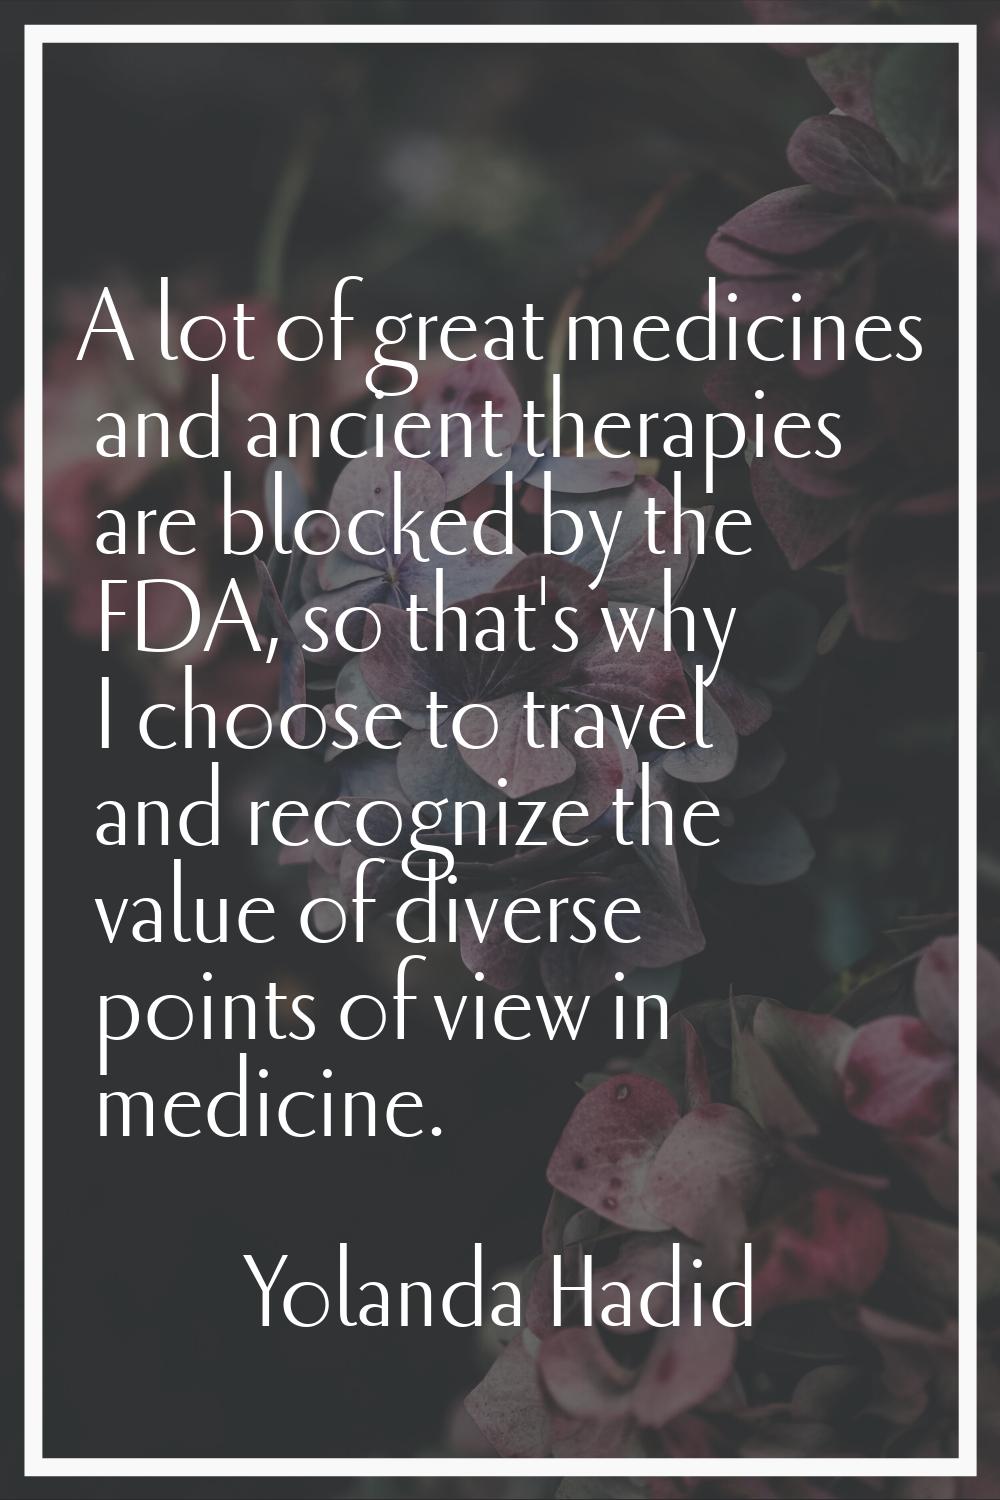 A lot of great medicines and ancient therapies are blocked by the FDA, so that's why I choose to tr